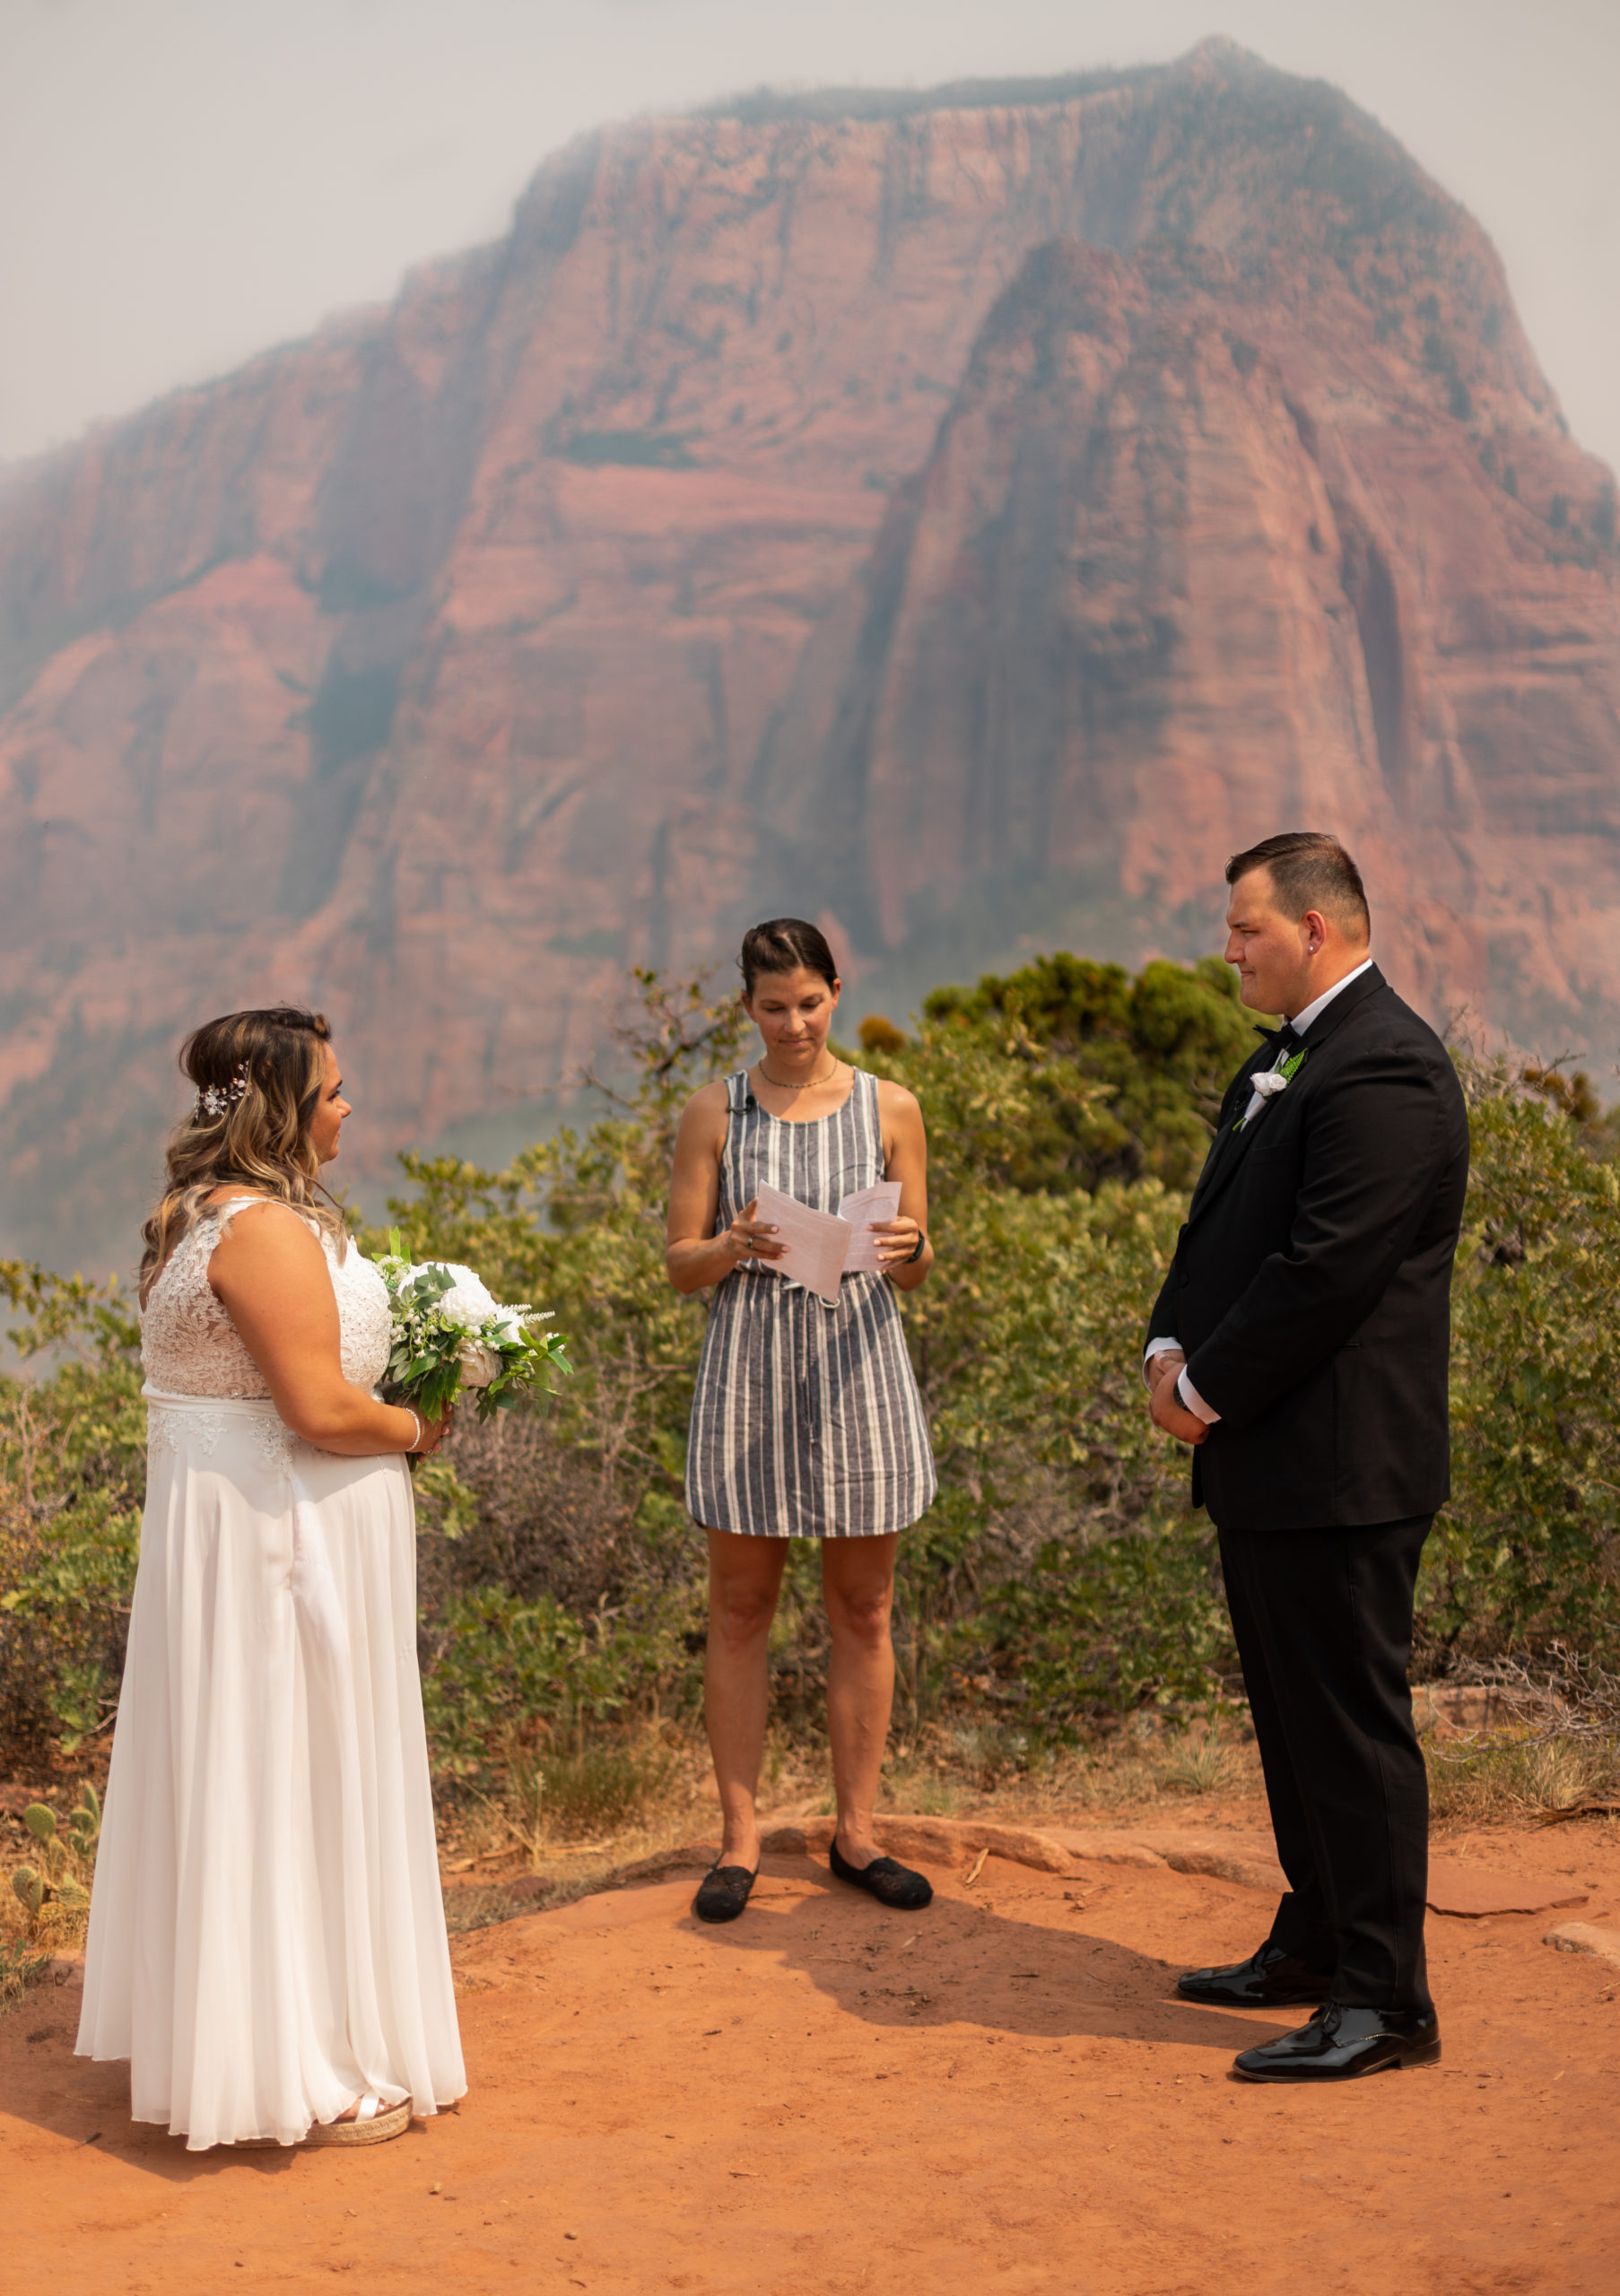 Bride and groom in Zion National Park